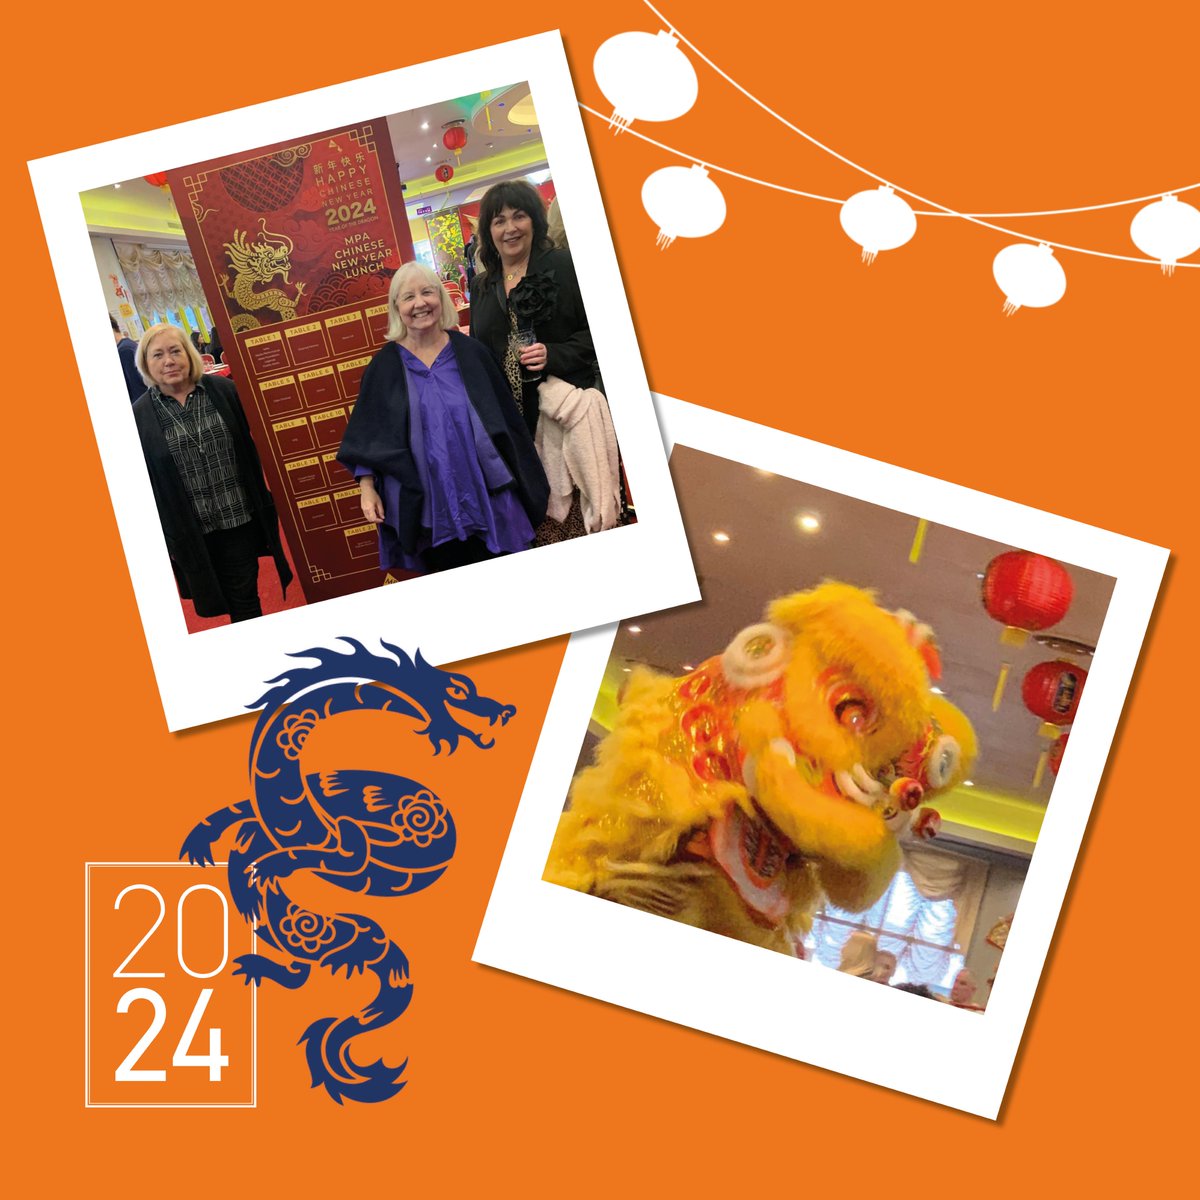 Big shoutout to @MPAweareyou  and @ideasfoundation (tee hee, us!) Grateful for Cindy Simmons’ organization of the Year of the Dragon event. #YearOfTheDragon #Prosperity #Creativity #Inclusion #Gratitude #IdeasFoundation #NewCreativeClass